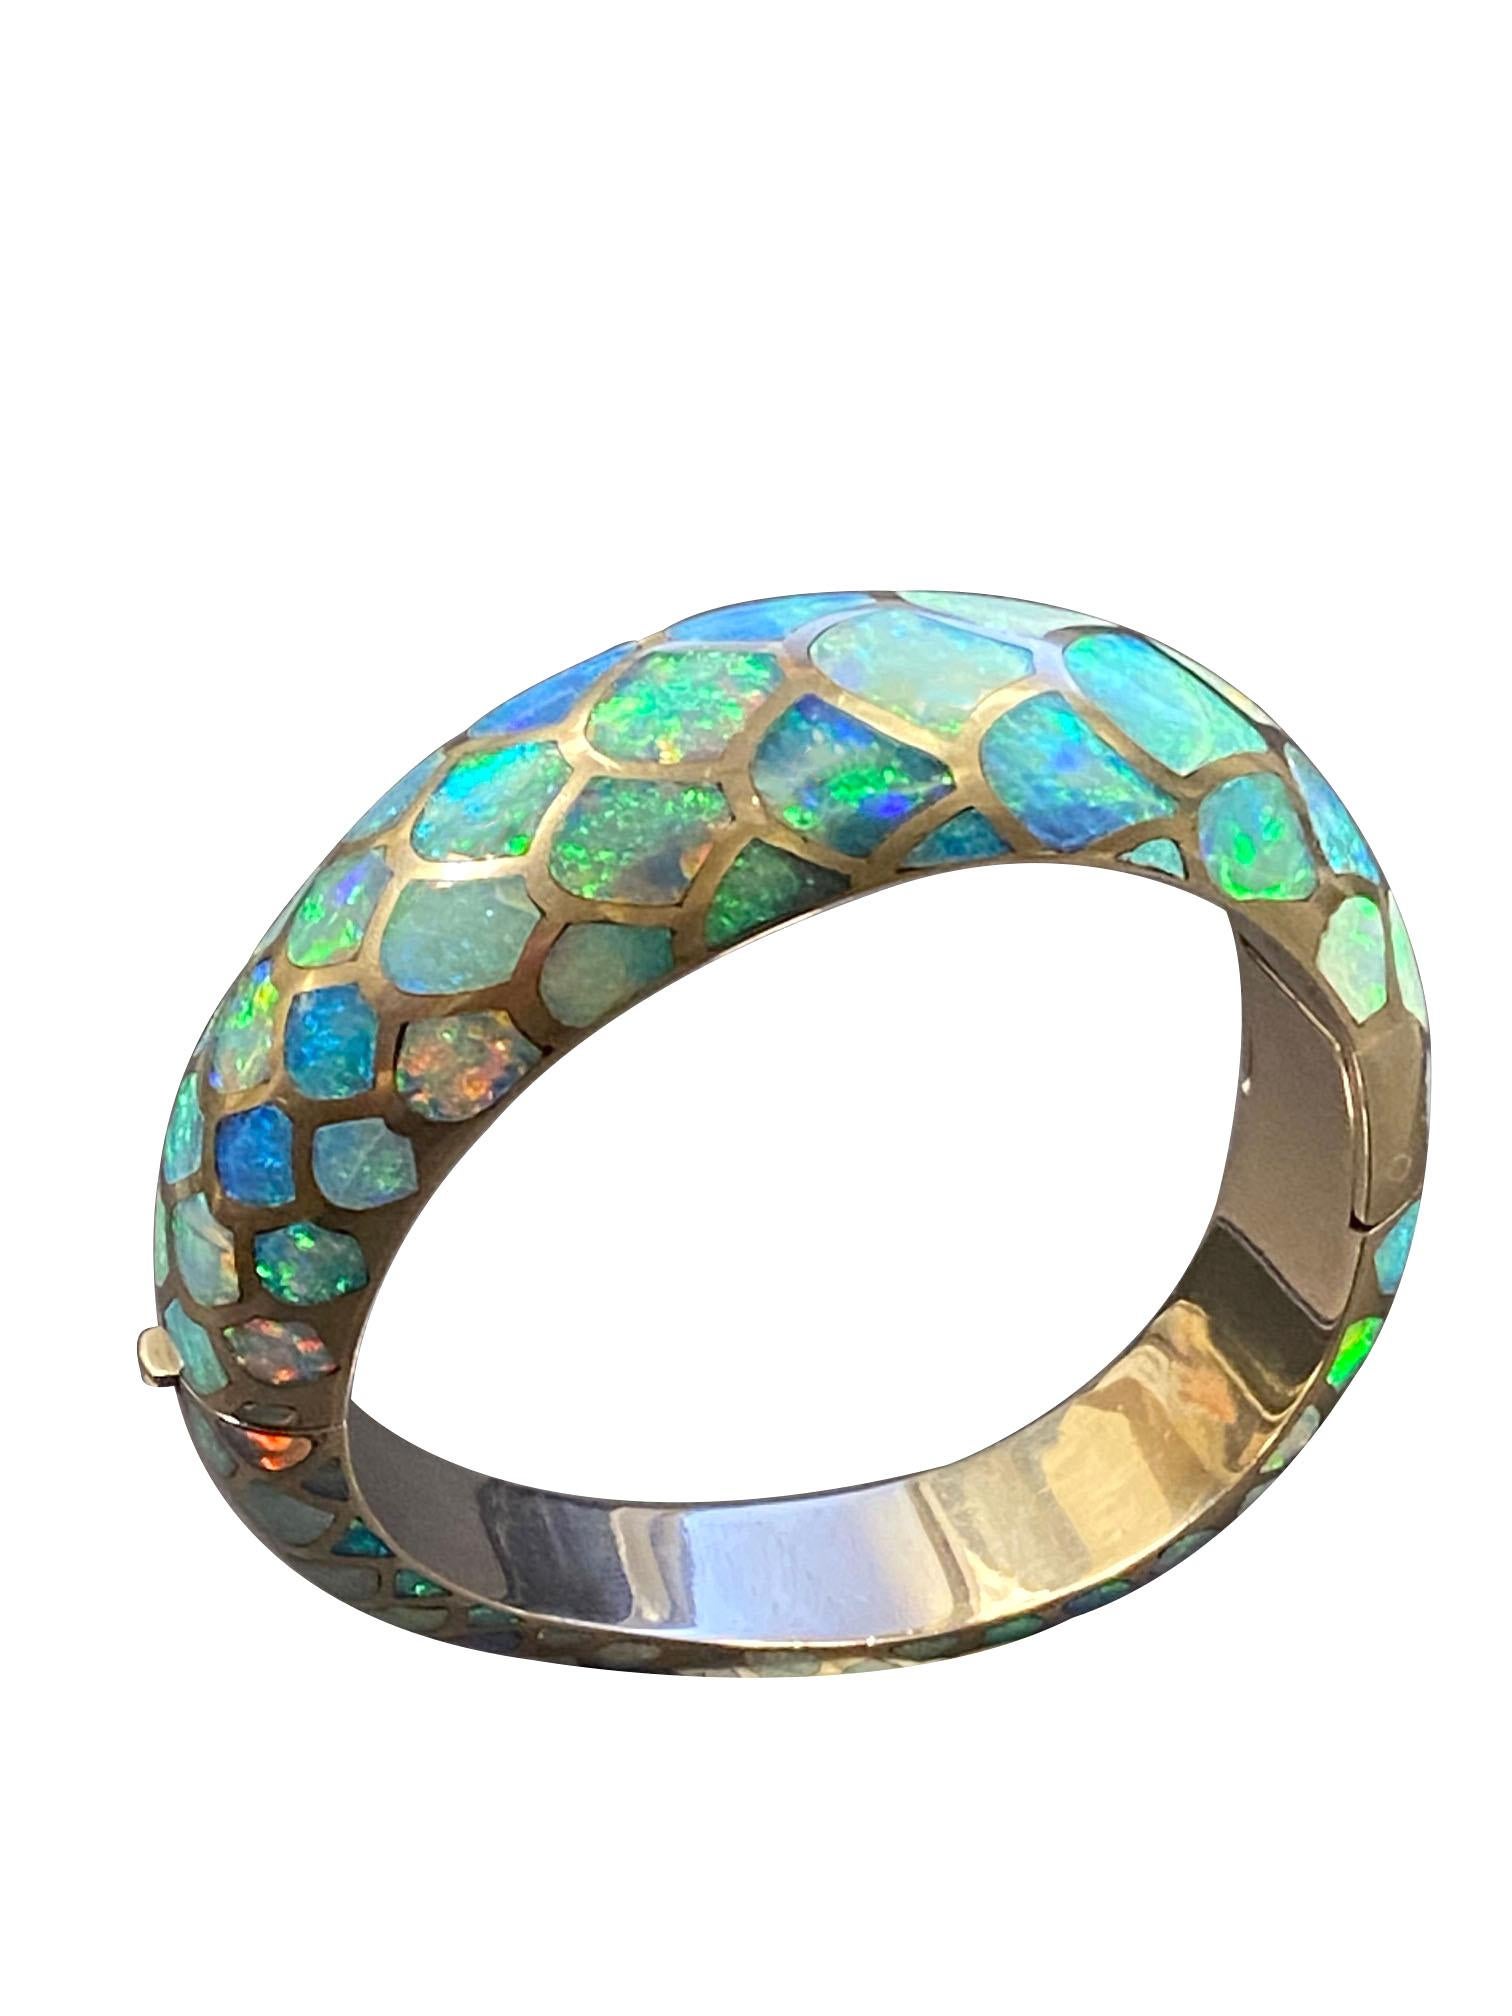 Angela Cummings White Gold and Opal Snakeskin Bangle Bracelet In Excellent Condition For Sale In Chicago, IL